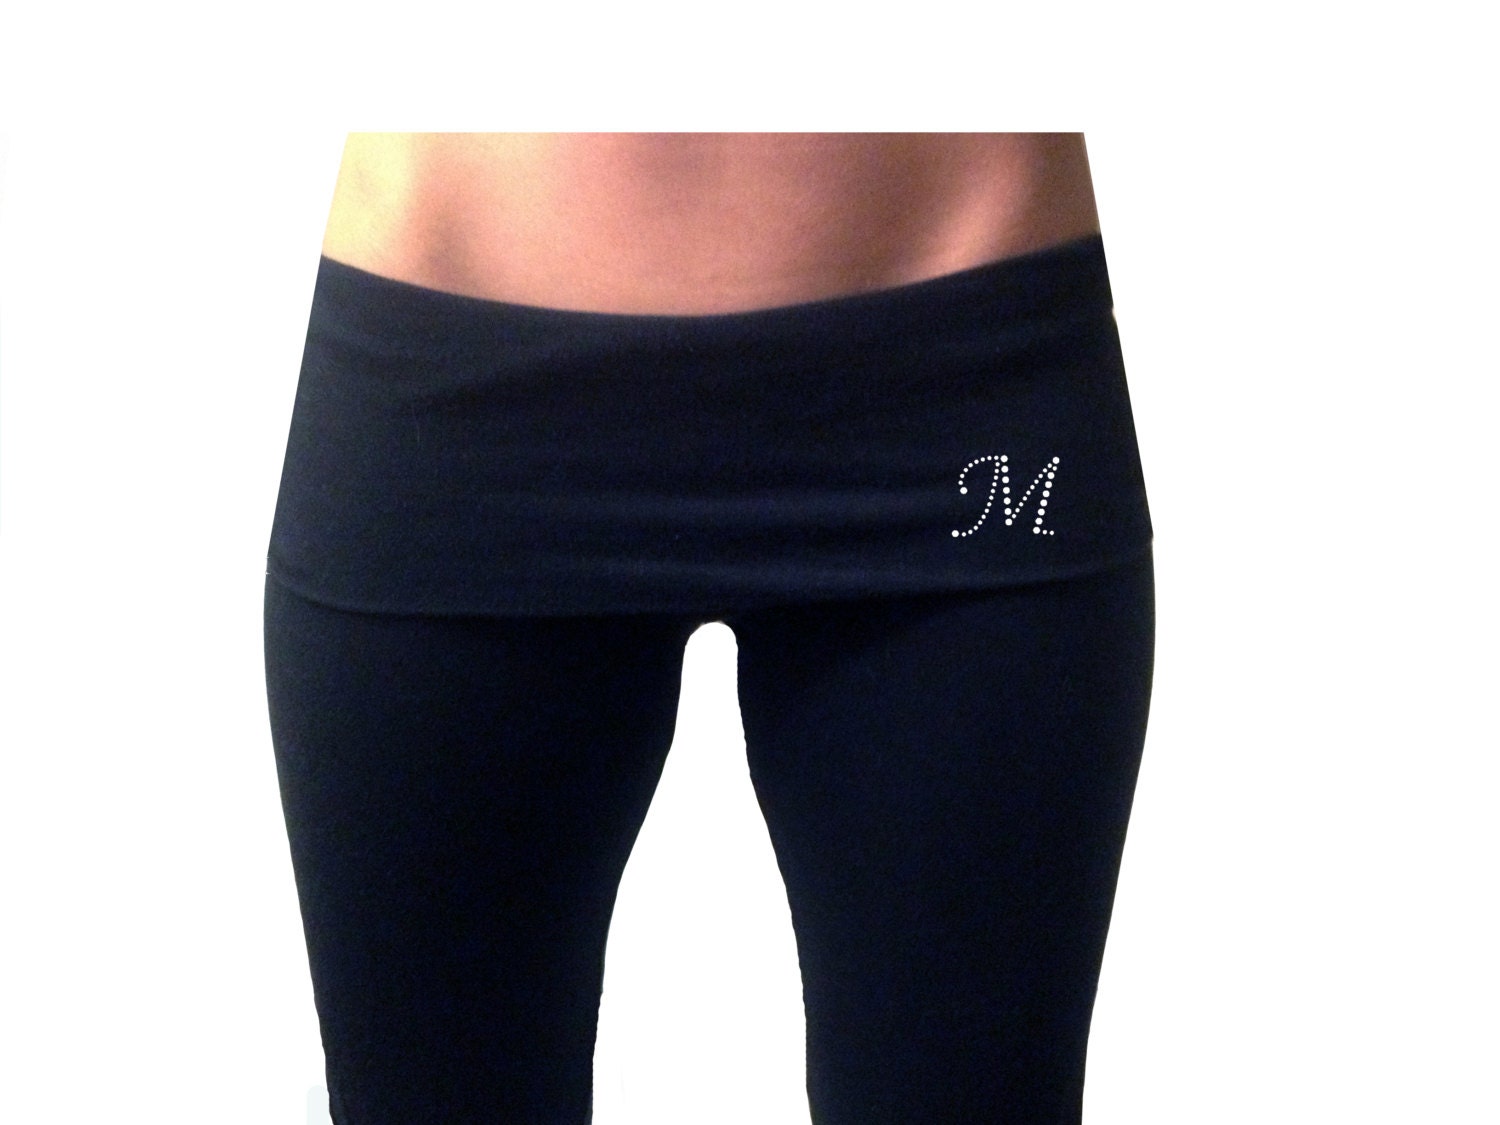 Black Fold Over Yoga Pants With Monogram Initial . Monogrammed